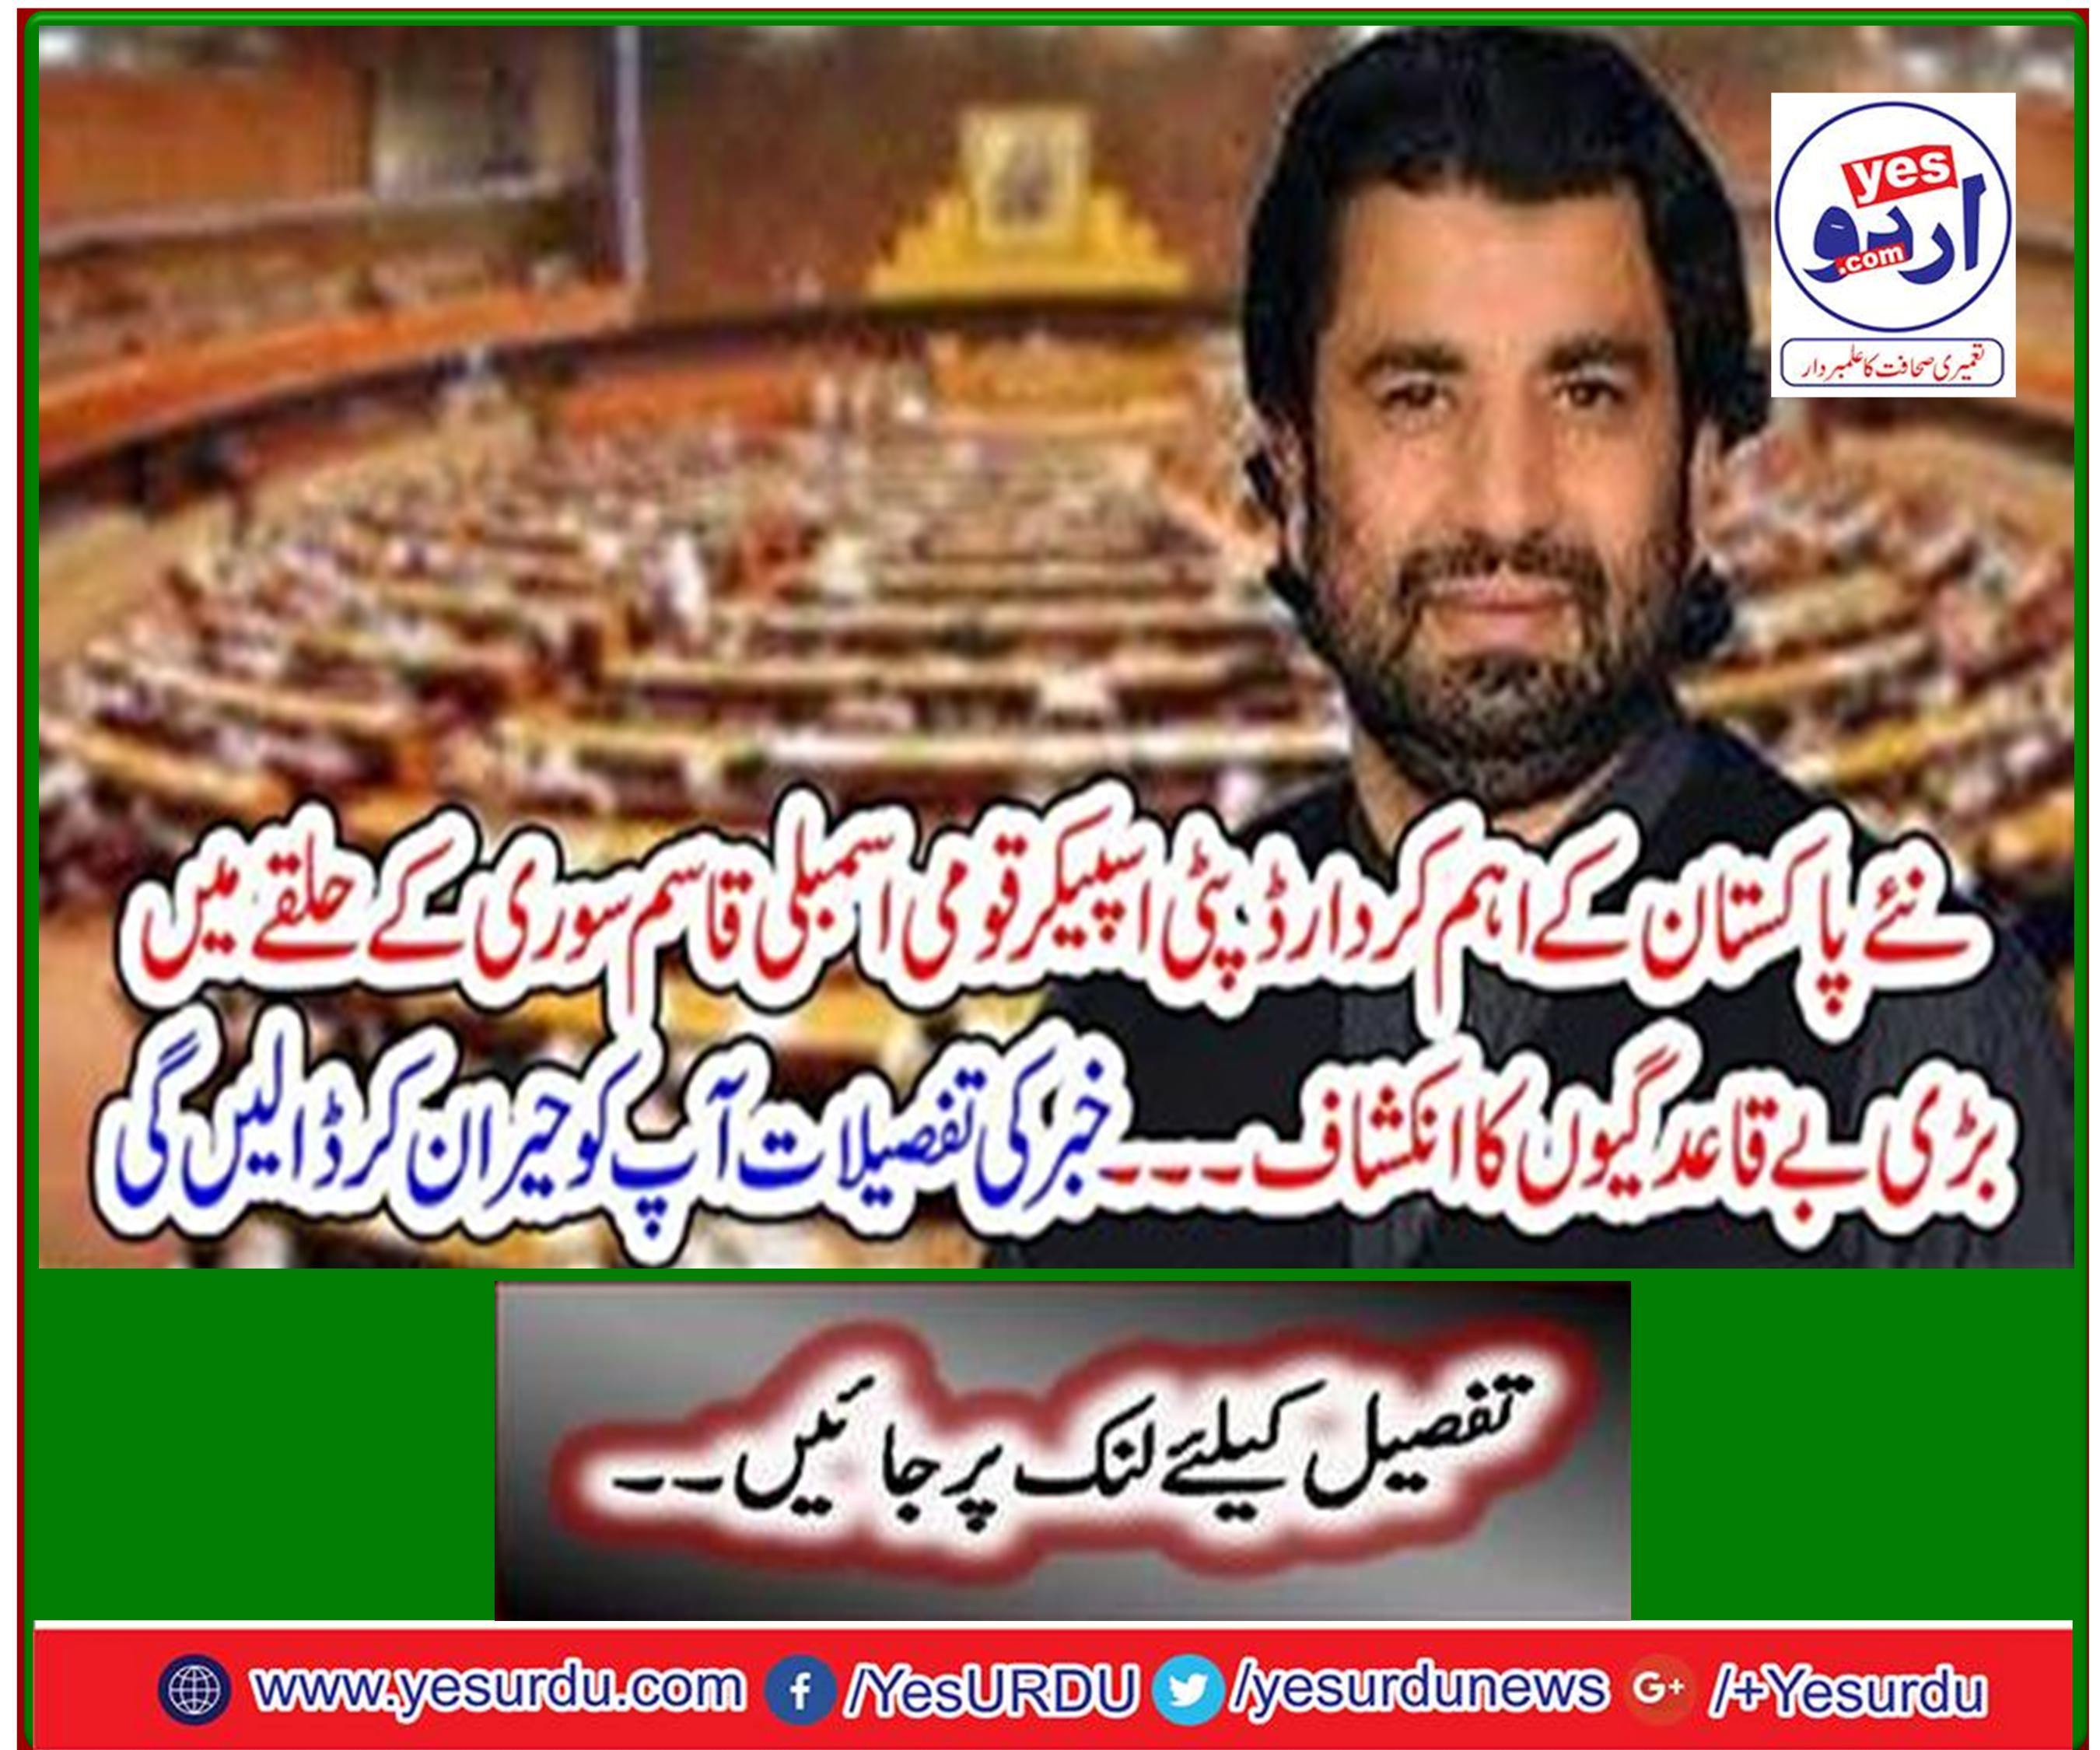 Deputy Speaker National Assembly Qasim Suri reveals major irregularities in the constituency of the new Pakistan ... The details of the news will surprise you